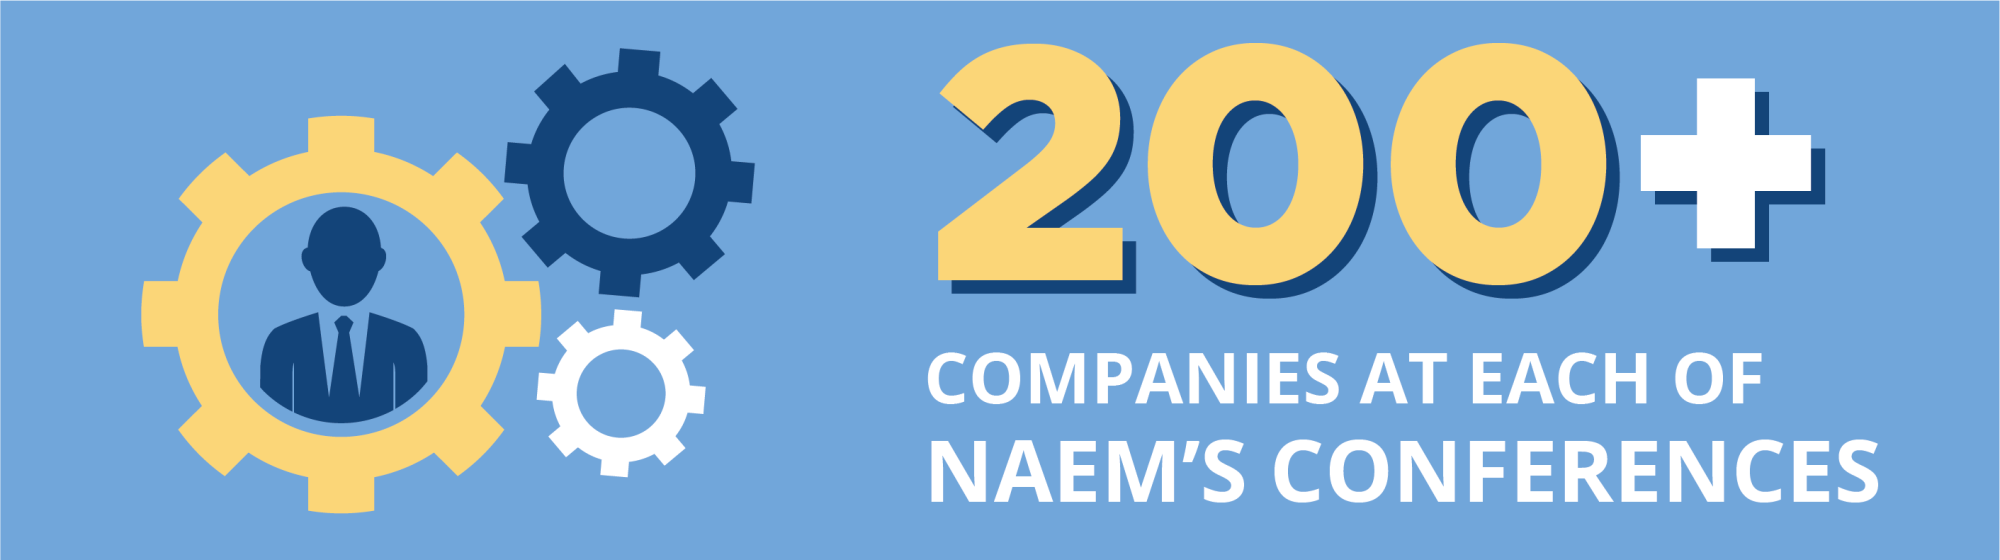 naem-2021-sponsorships-sales-infographic-section-3-2000x560